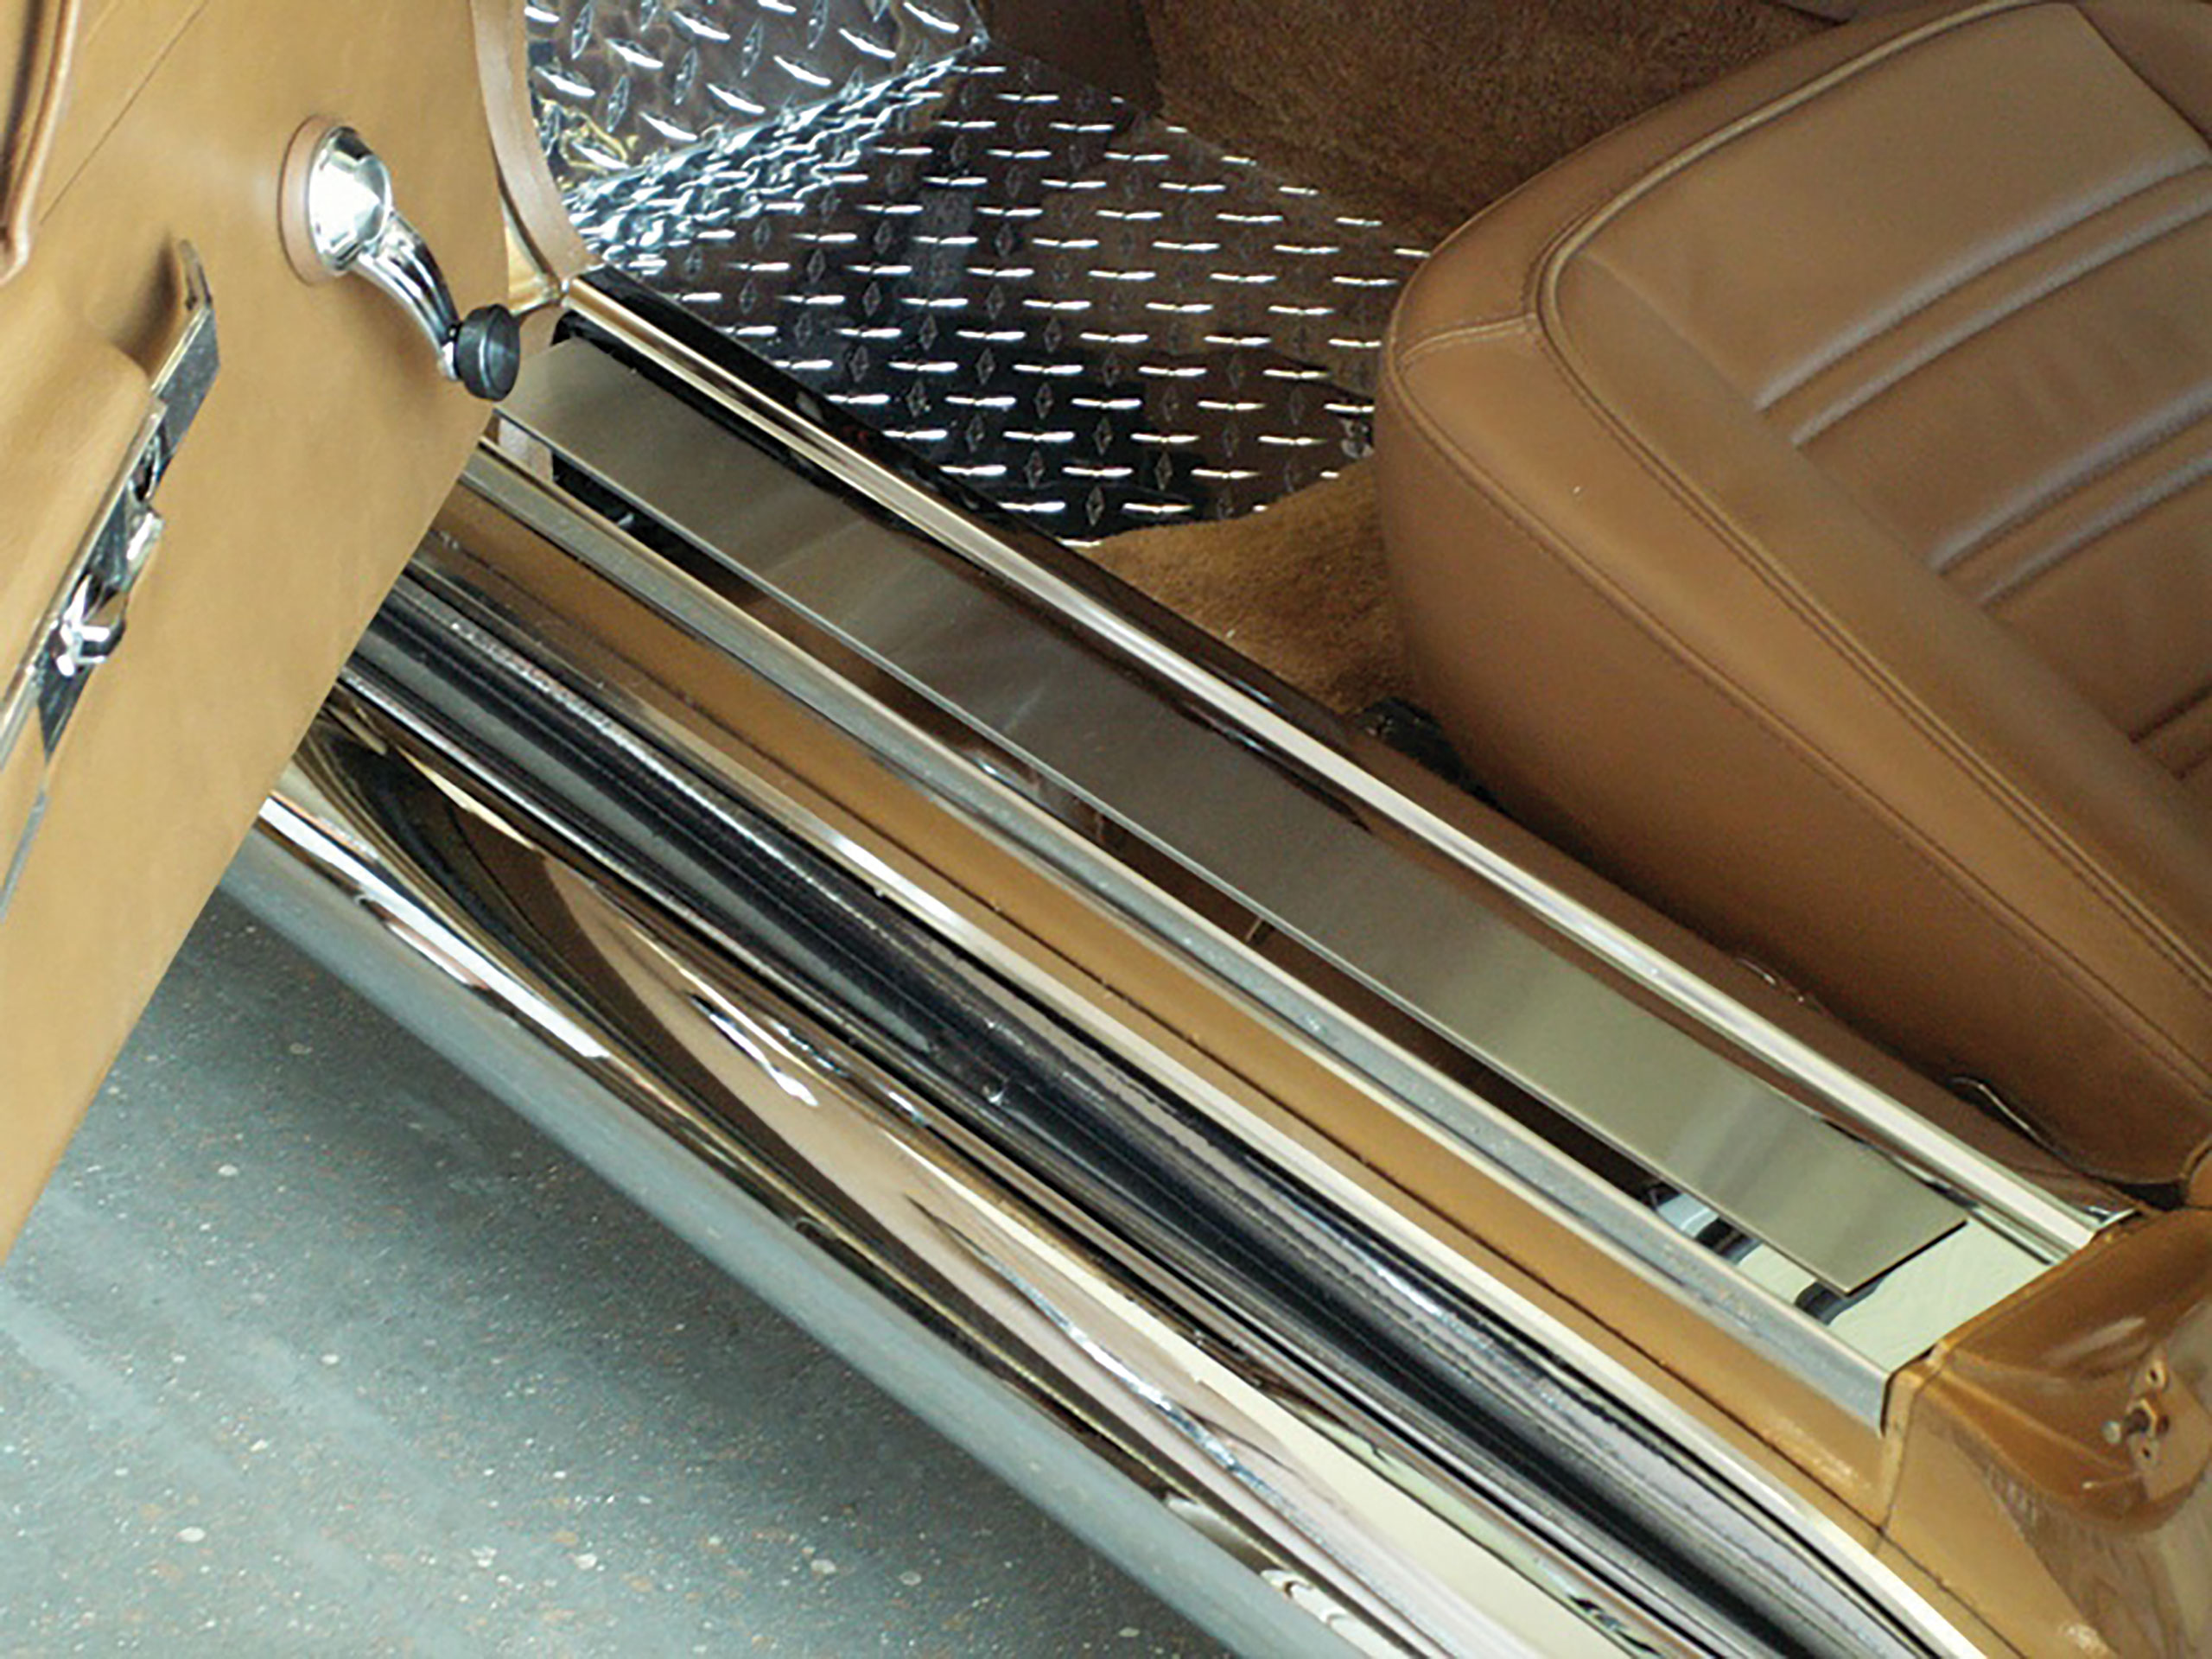 C3 1968-1977 Chevrolet Corvette Door Sills, Polished Stainless Steel W/Brushed Inserts Deluxe - 2pc - American Car Craft